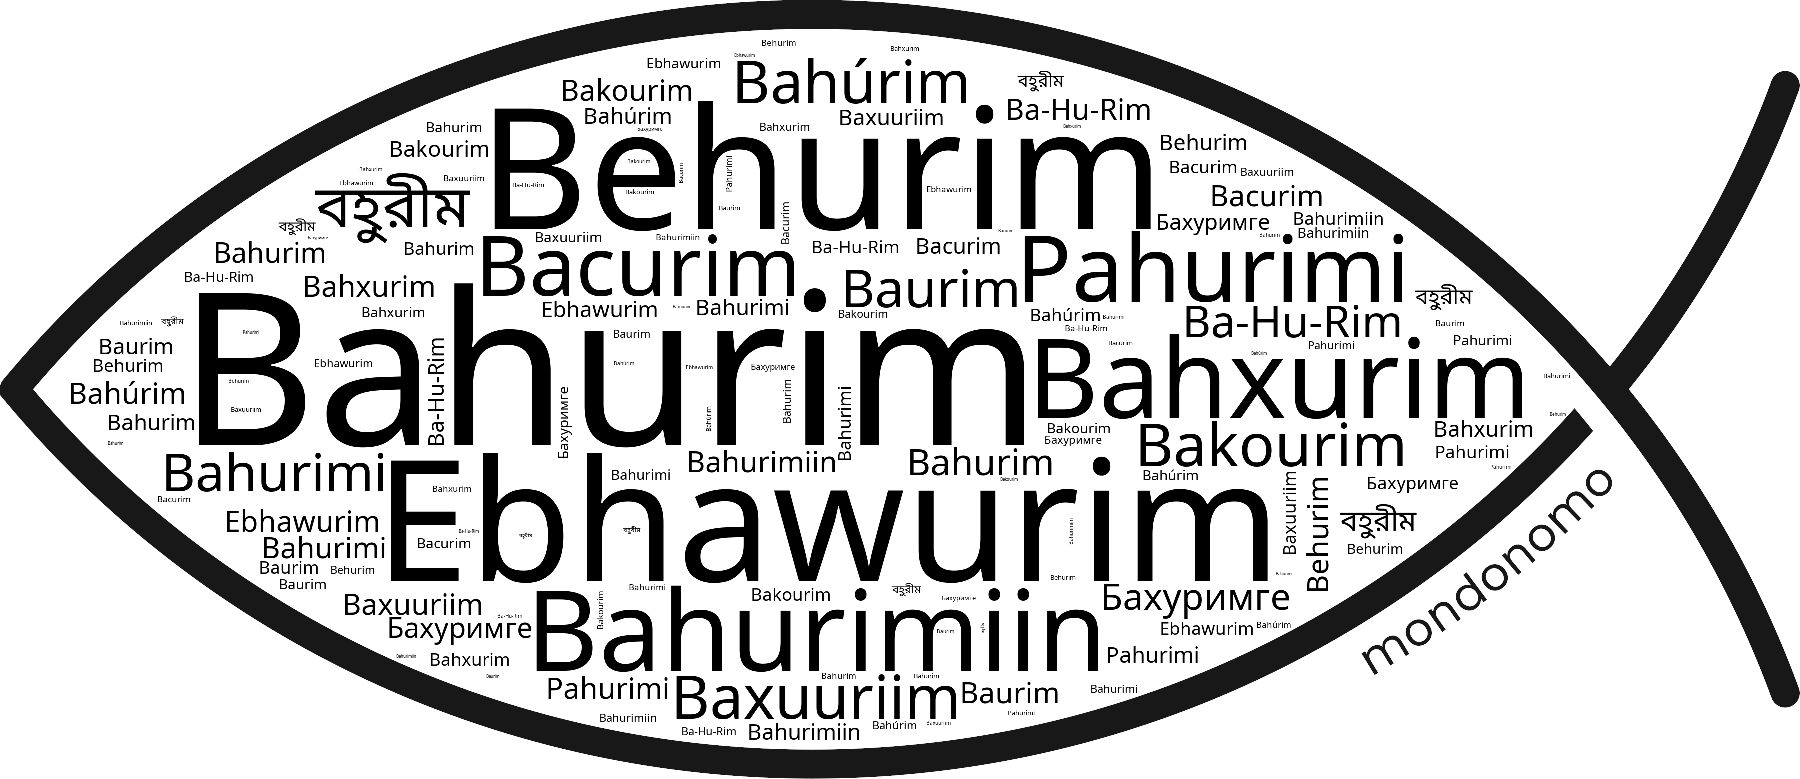 Name Bahurim in the world's Bibles